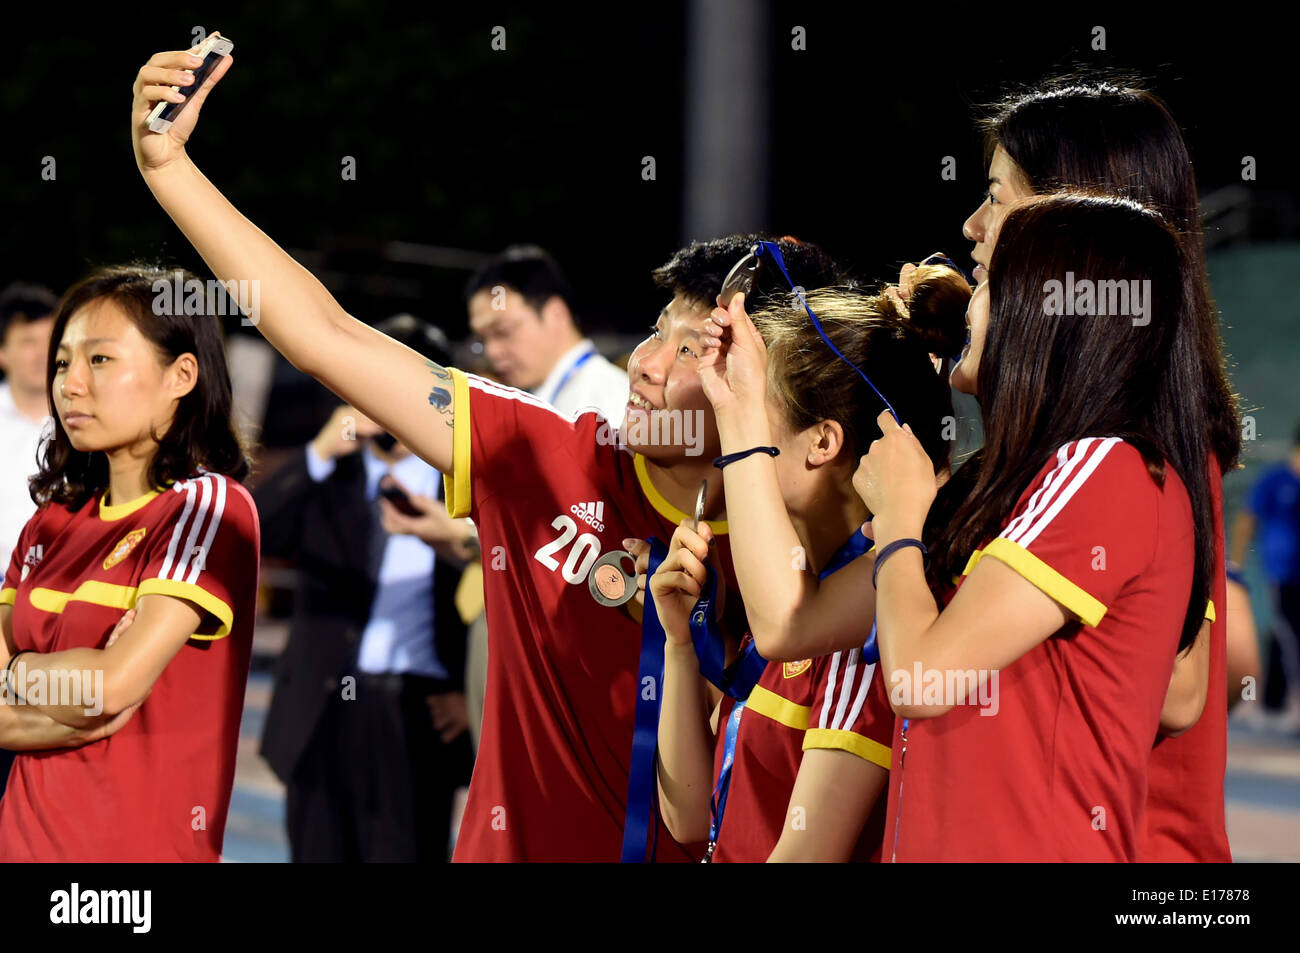 Ho Chi Minh City, Vietnam. 25th May, 2014. Team China celebrate during the award ceremony at the 2014 Asian Football Confederation (AFC) Women's Asian Cup at Thong Nhat Stadium in Ho Chi Minh City, Vietnam, May 25, 2014. China defeat South Korea 2-1 to win the third place of the event. © Cheong Kam Ka/Xinhua/Alamy Live News Stock Photo